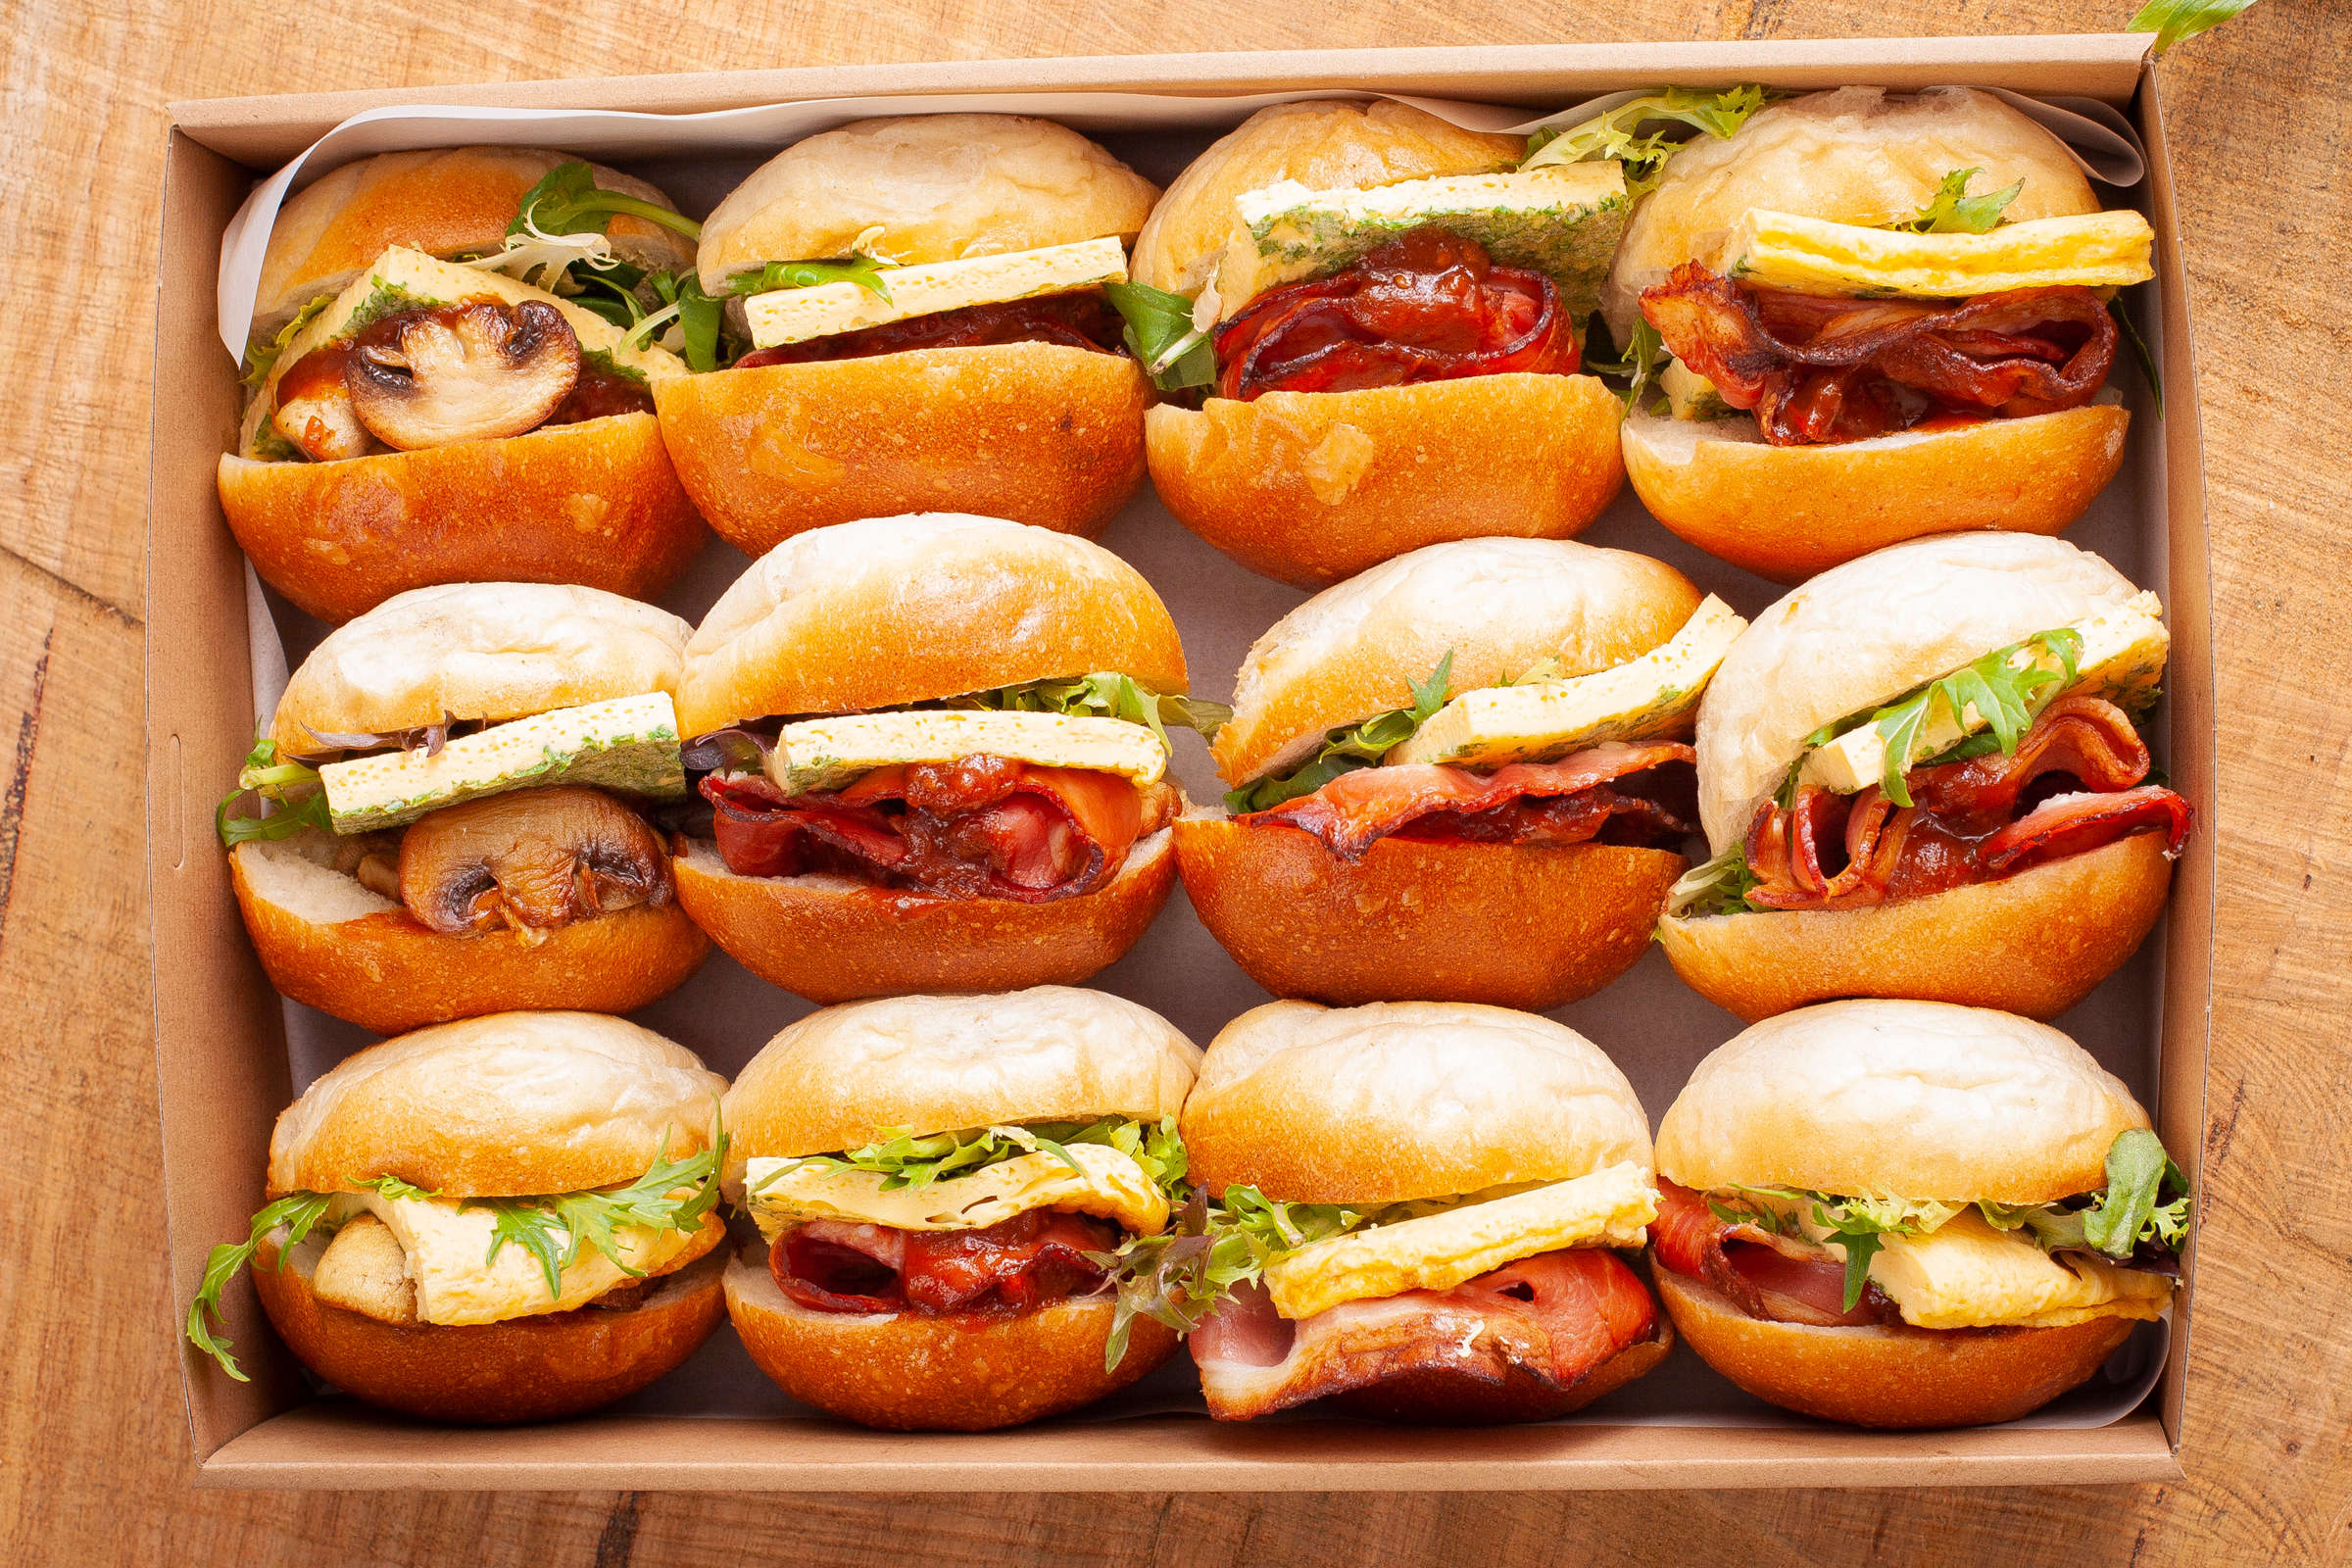 Catering box containing twelve breakfast rolls including some egg and bacon with tomato relish rolls, and some egg and mushroom with tomato relish rolls. Credit: Richard Jupe.